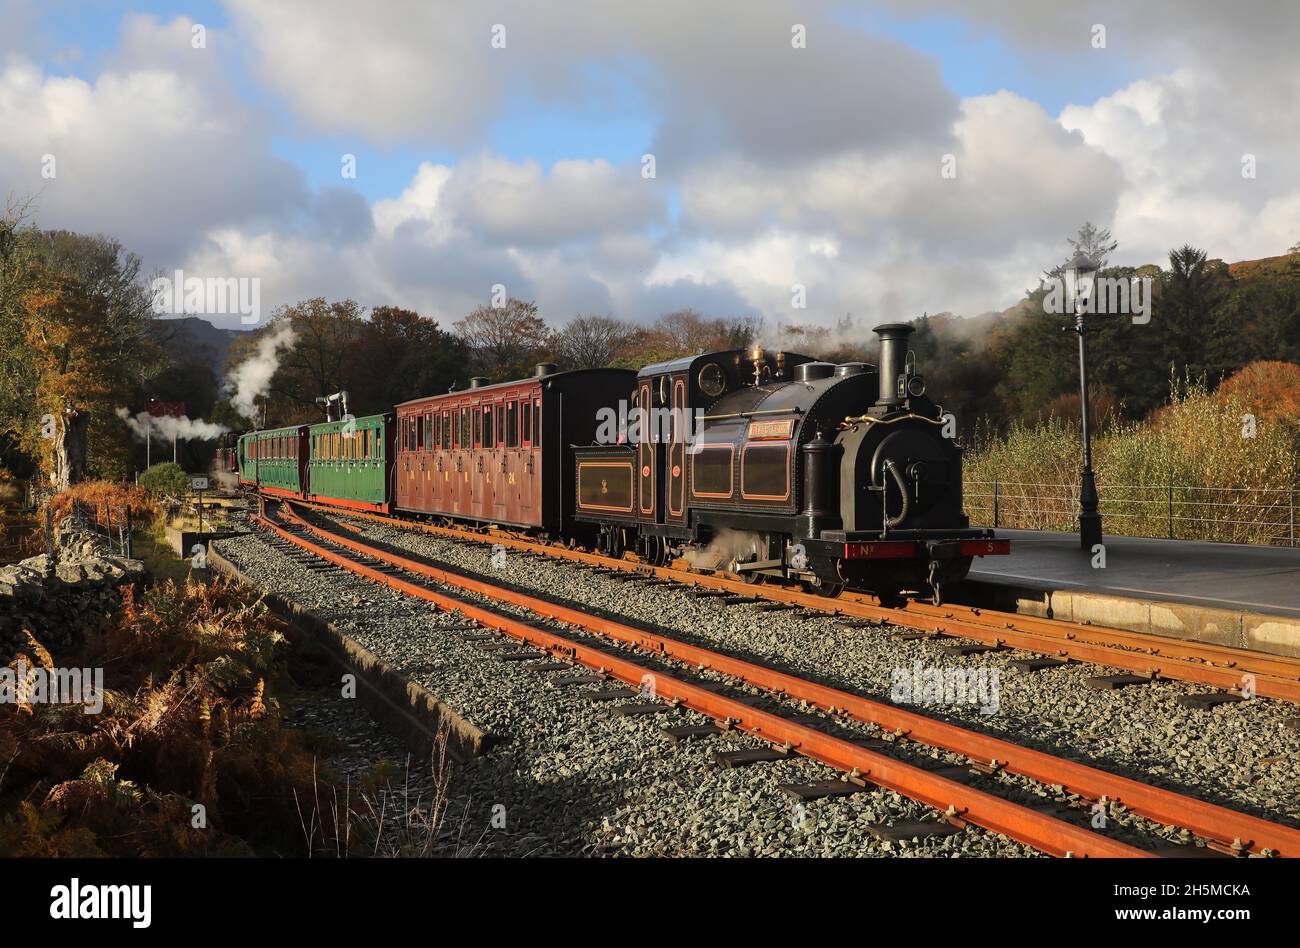 No5 Welsh Pony waters at Beddgelert on the Welsh Highland Railway. Stock Photo